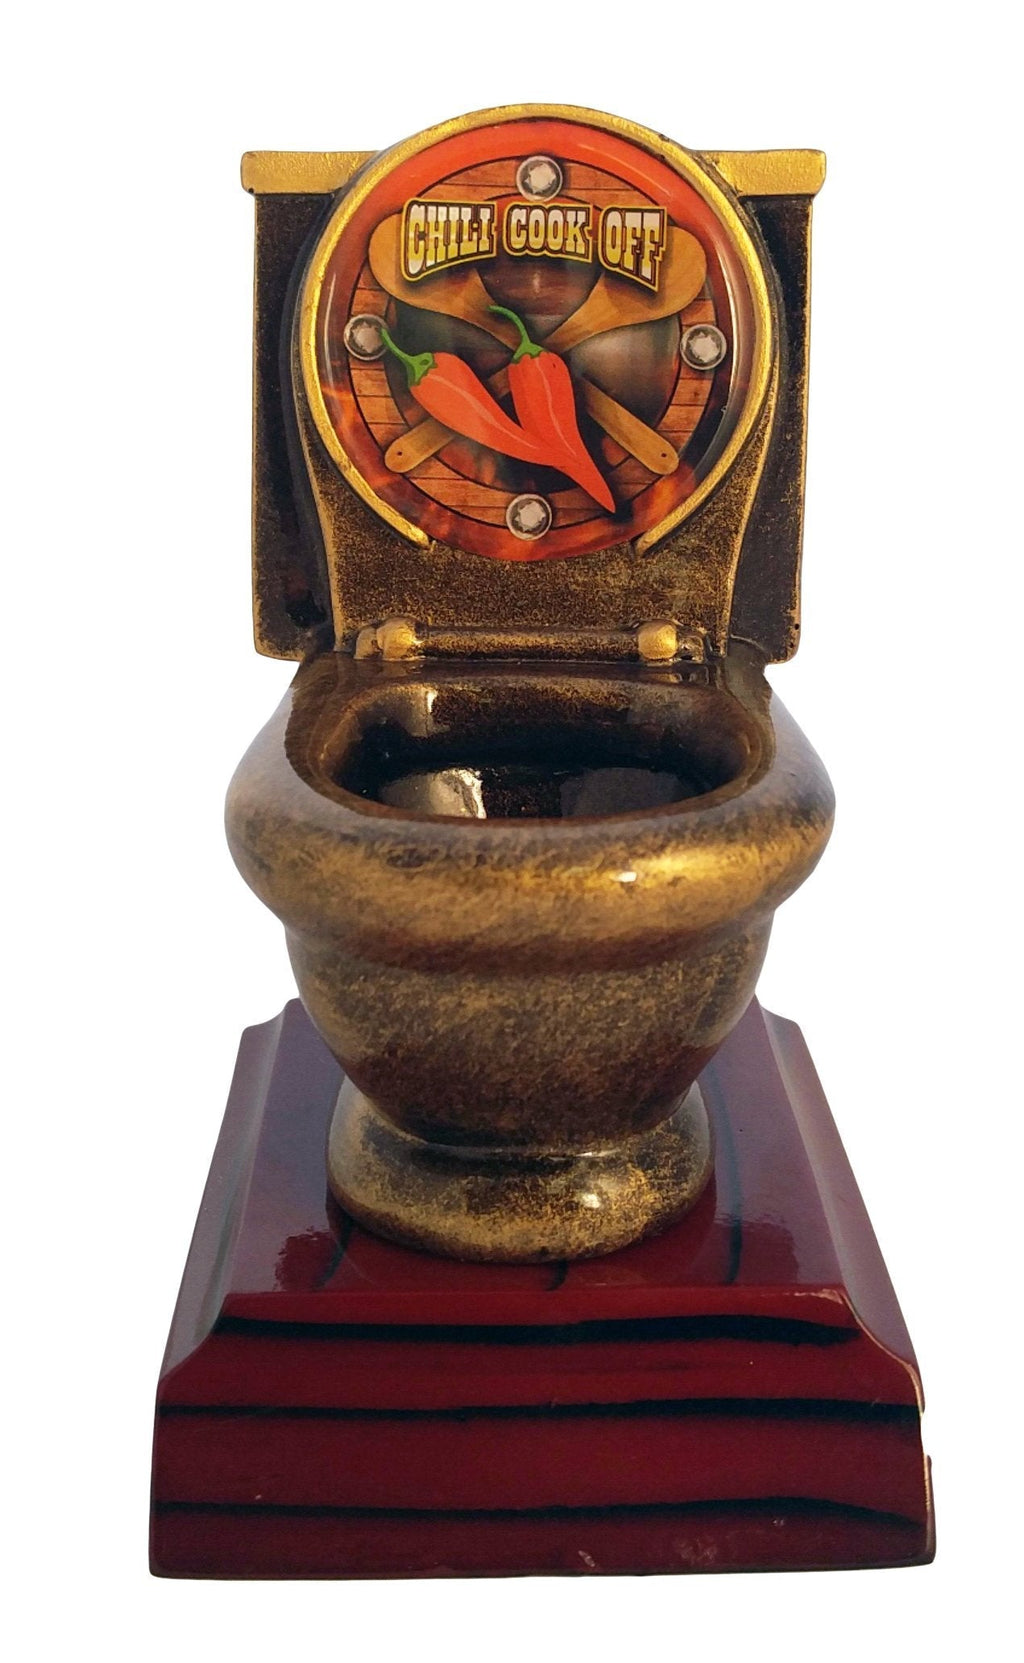 Decade Awards Chili Cook-Off Toilet Bowl Trophy, Gold - Chili Competition Last Place Award - 5 Inch Tall - Engraved Plate on Request - BeesActive Australia